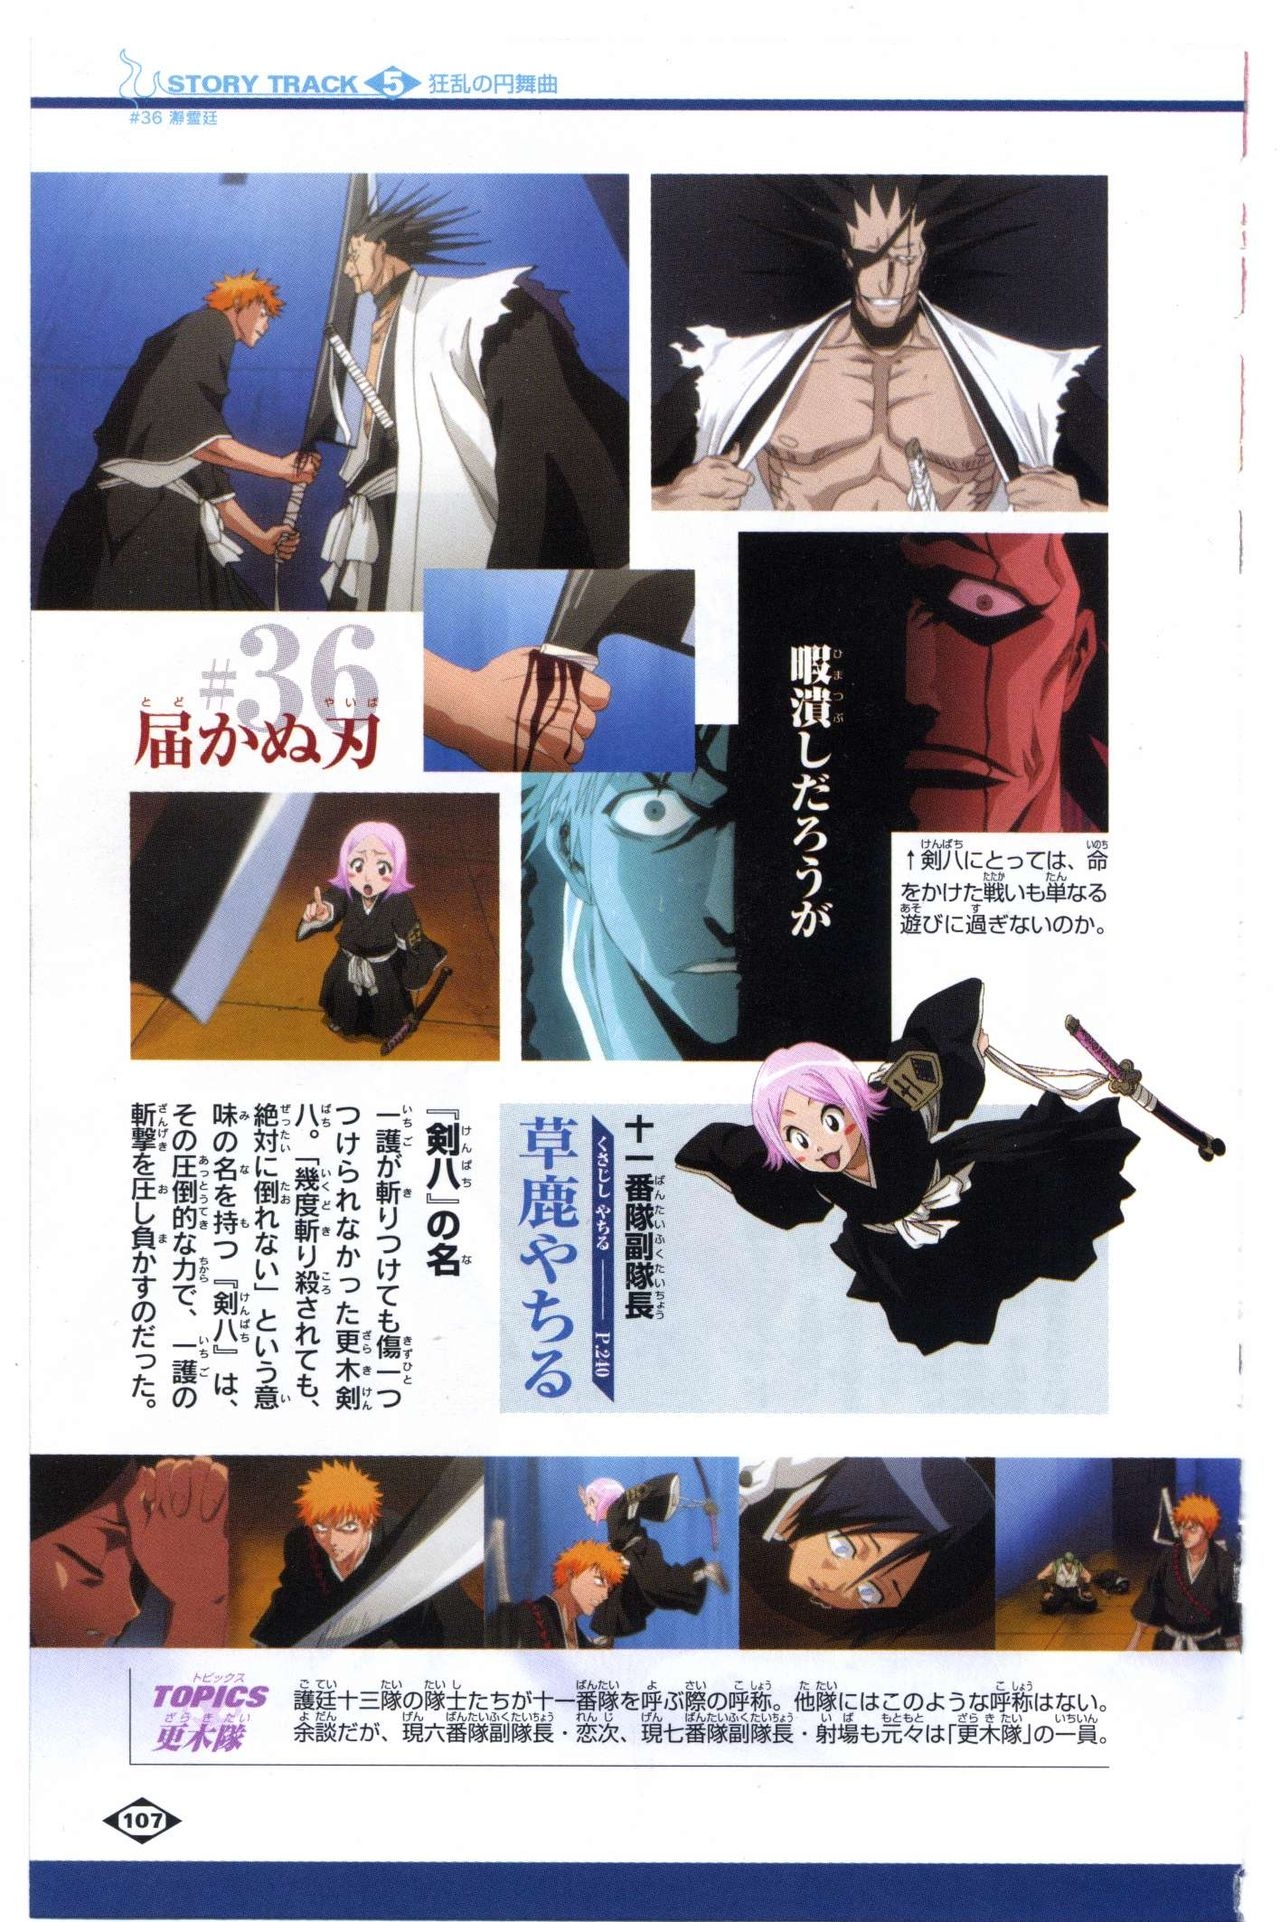 Bleach: Official Animation Book VIBEs 107